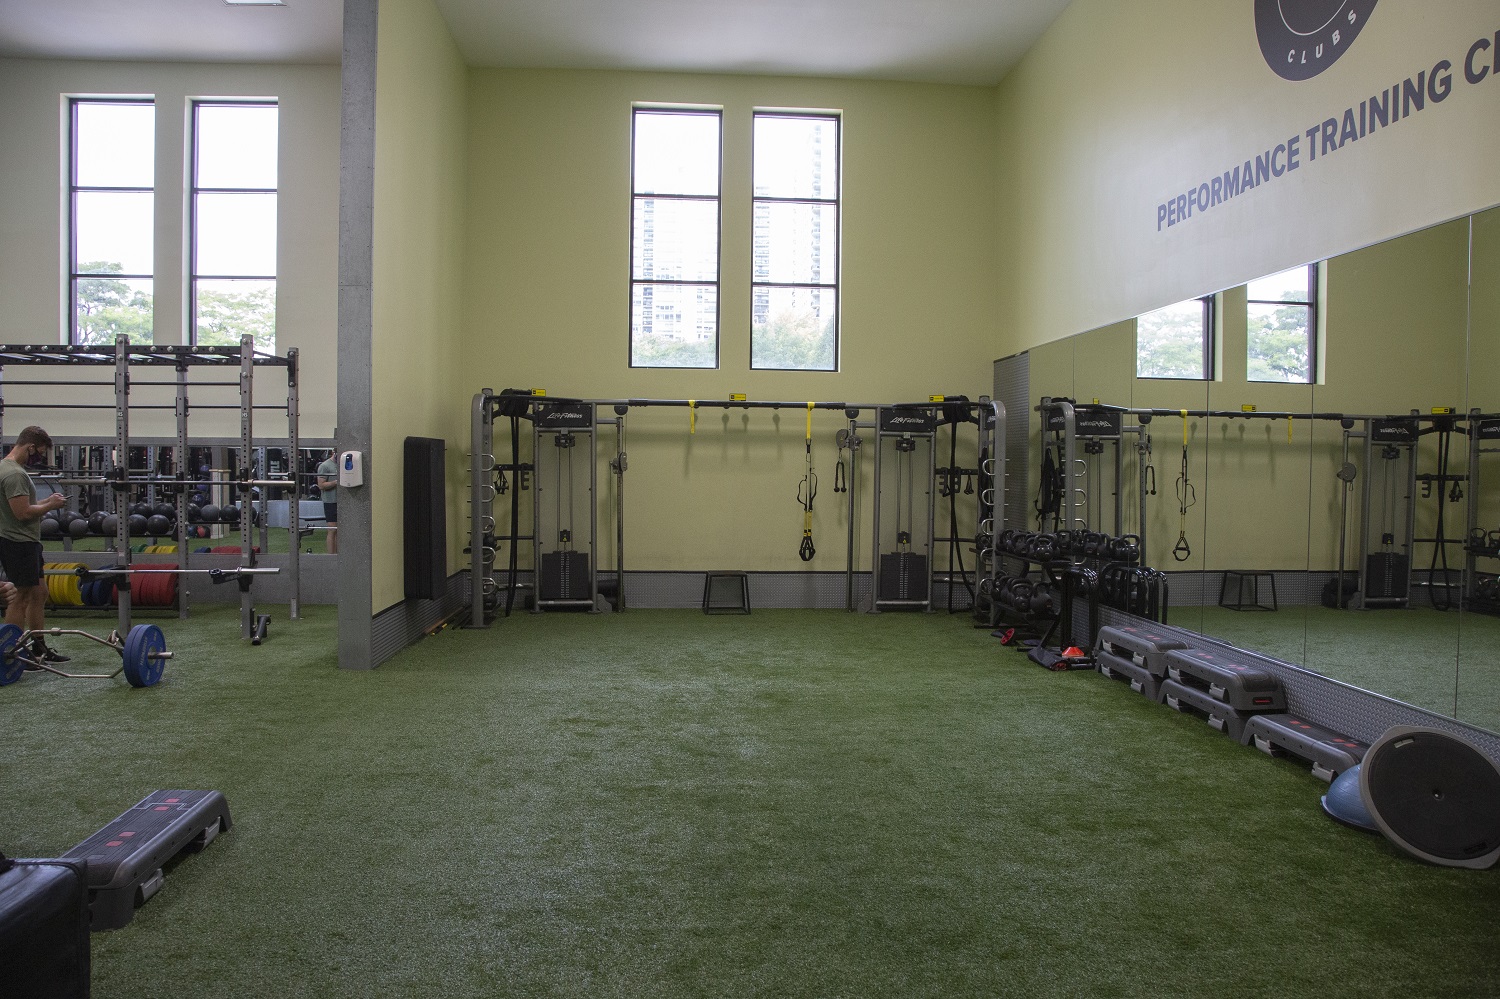 Photo of the FFC Old Town indoor turf and Performance Training Center.